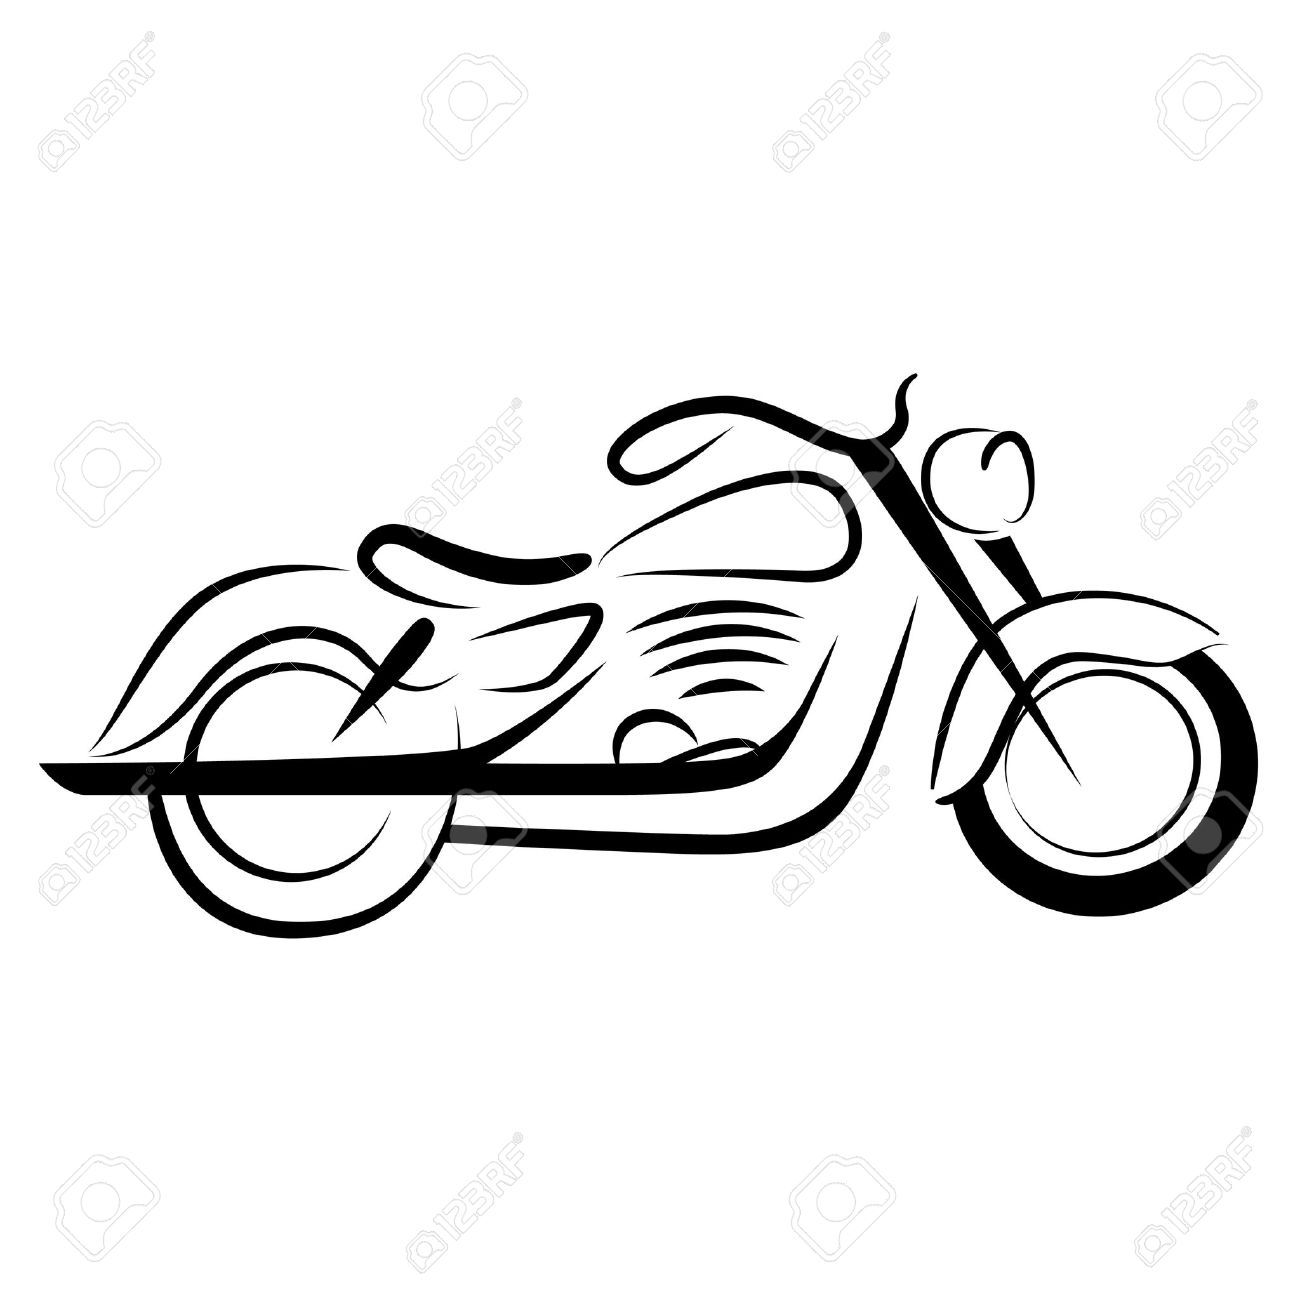 motorcycle clipart images drawing water